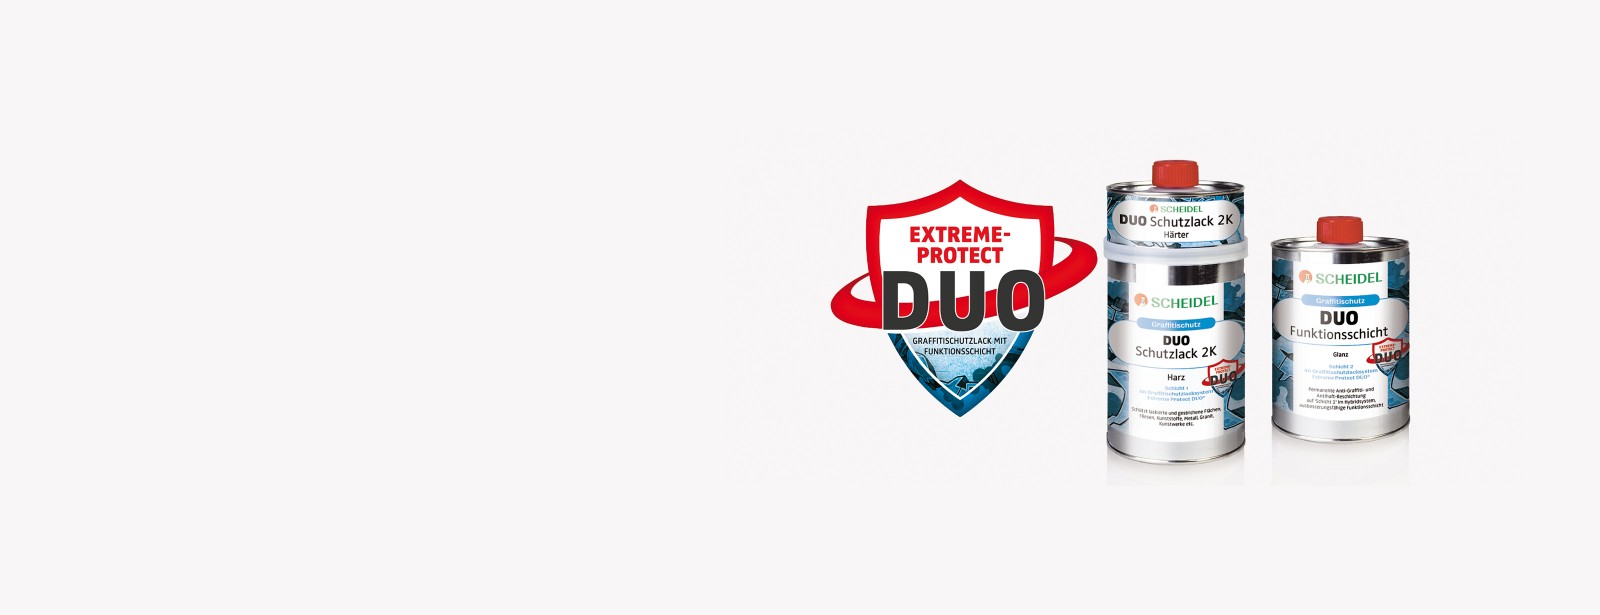 extreme-protect-duo-11-1.jpg